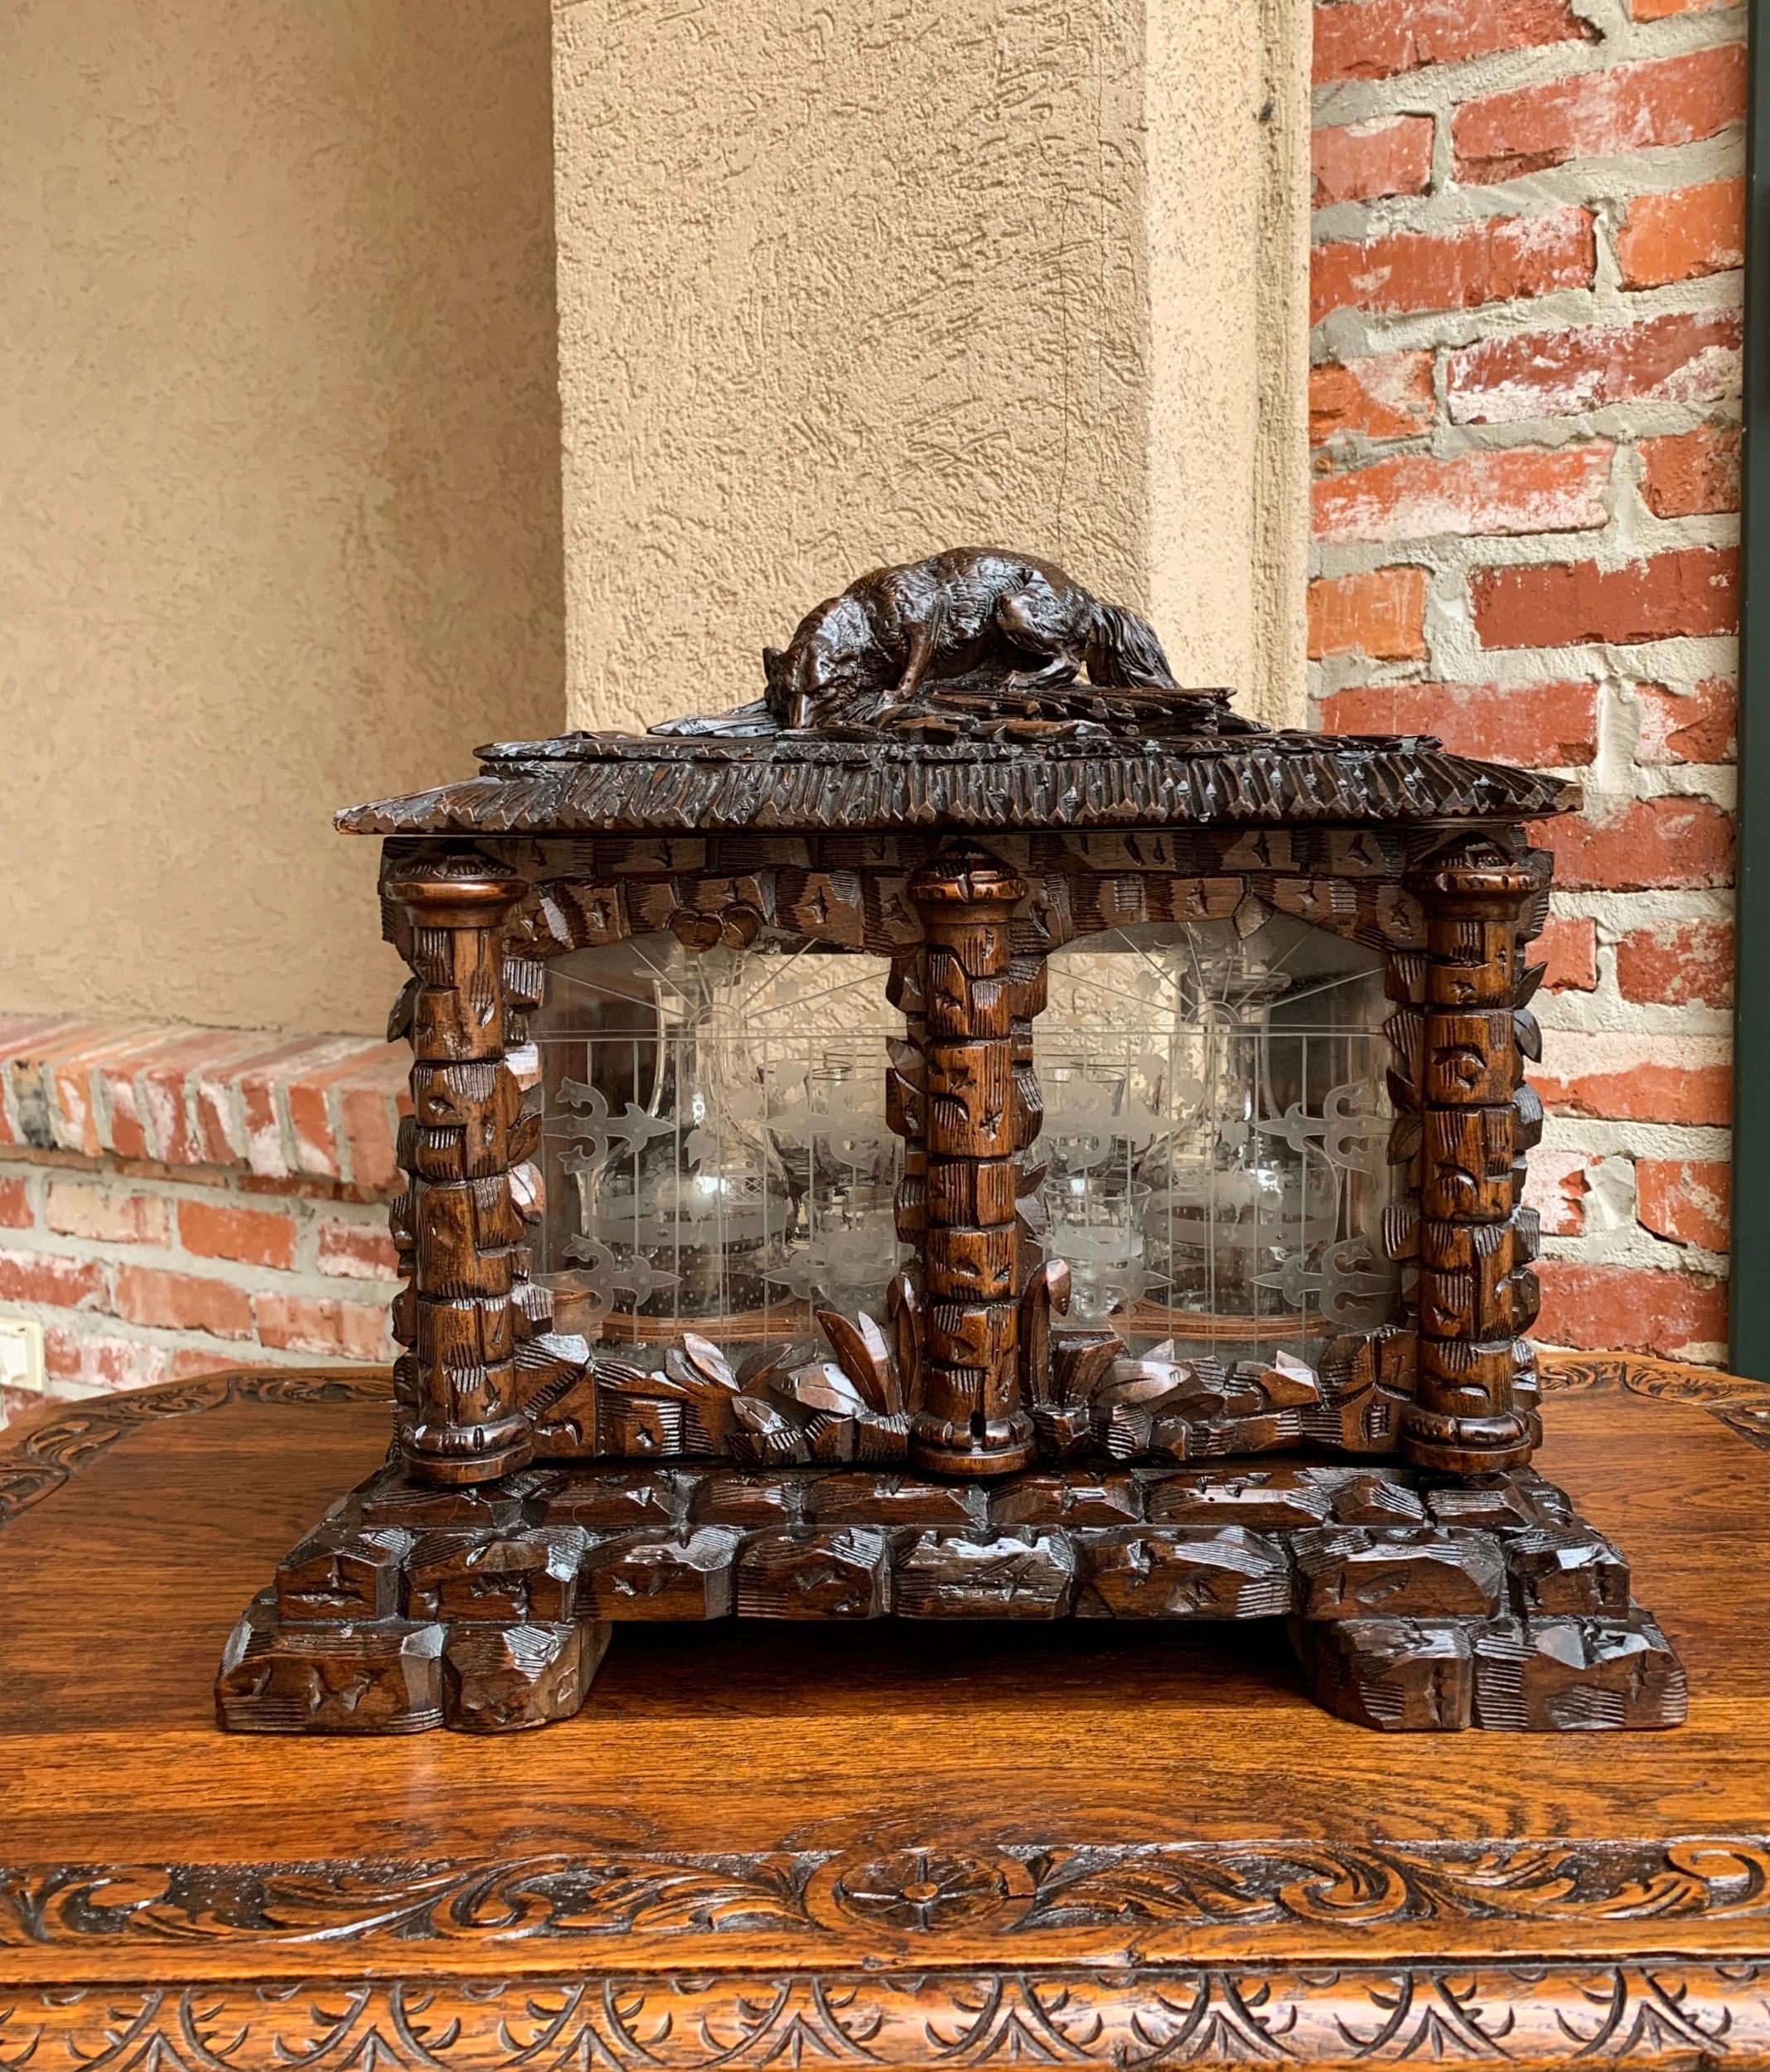 Antique French Black Forest Tantalus hunt dog liquor box decanter Cavé à Liqueur

~Direct from France~
~Stunning carved Black Forest tantalus or “cavé à Liqueur”!~
~The motif on the case is faux bois and stone (carvings emulate wood thatch roof